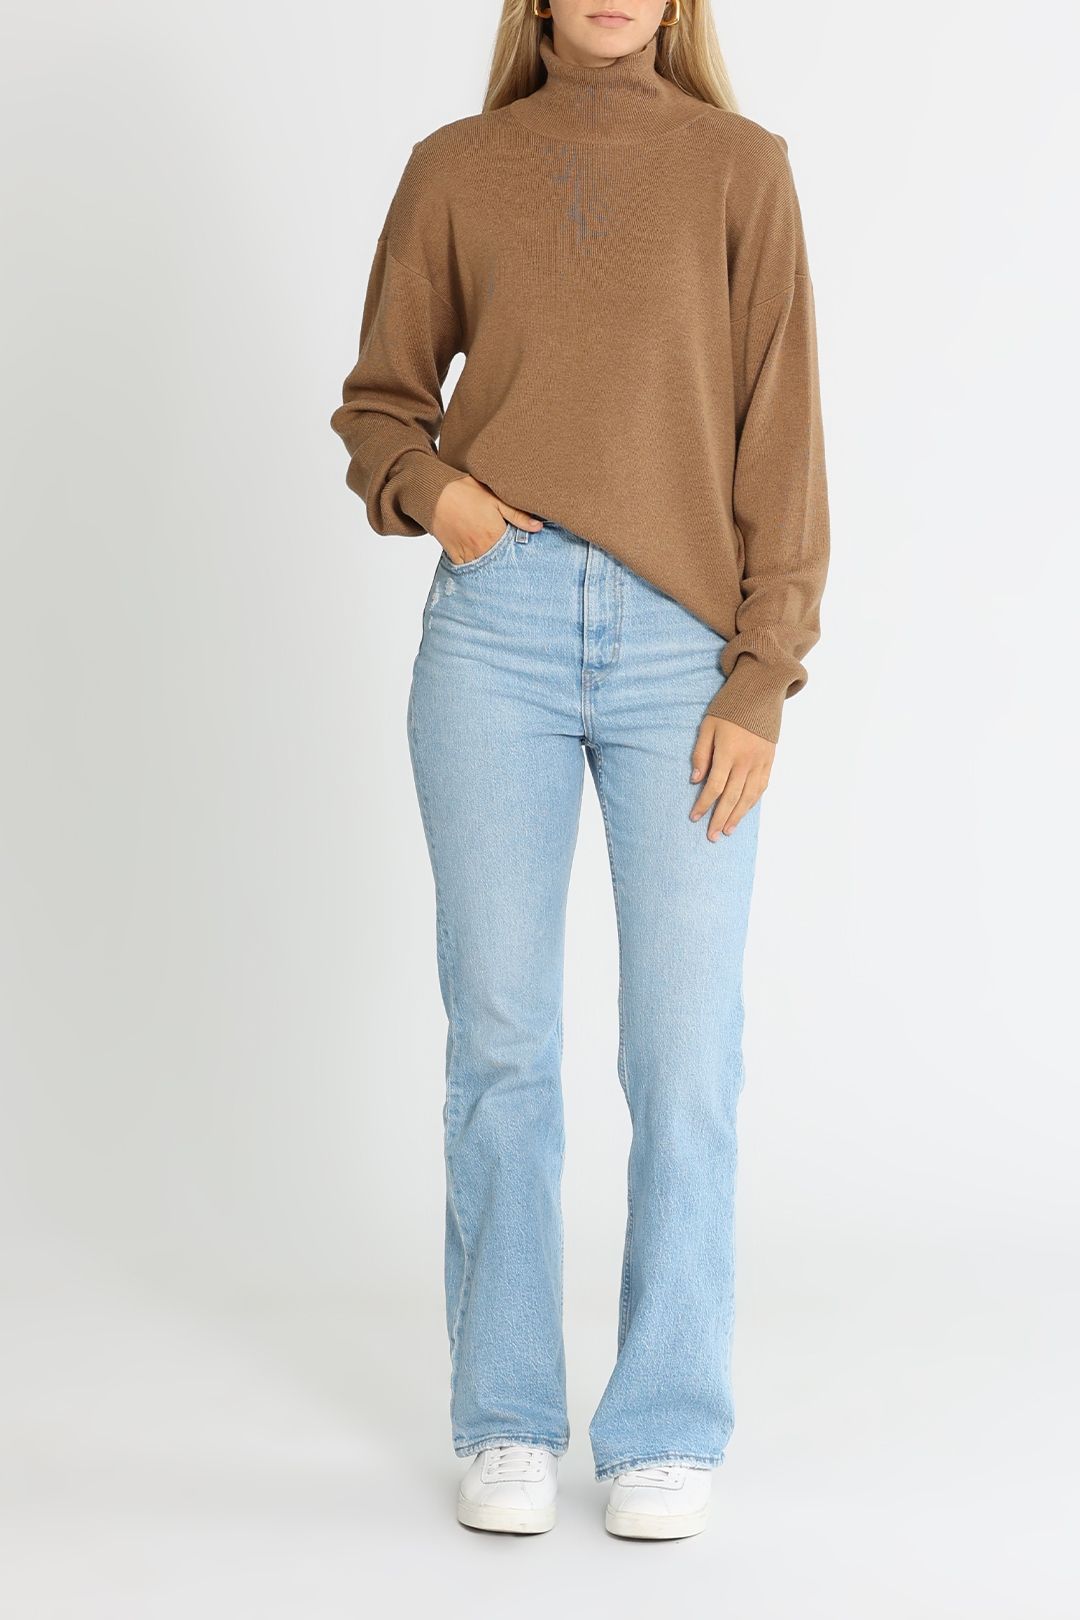 Elka Collective Paola Knit Camel